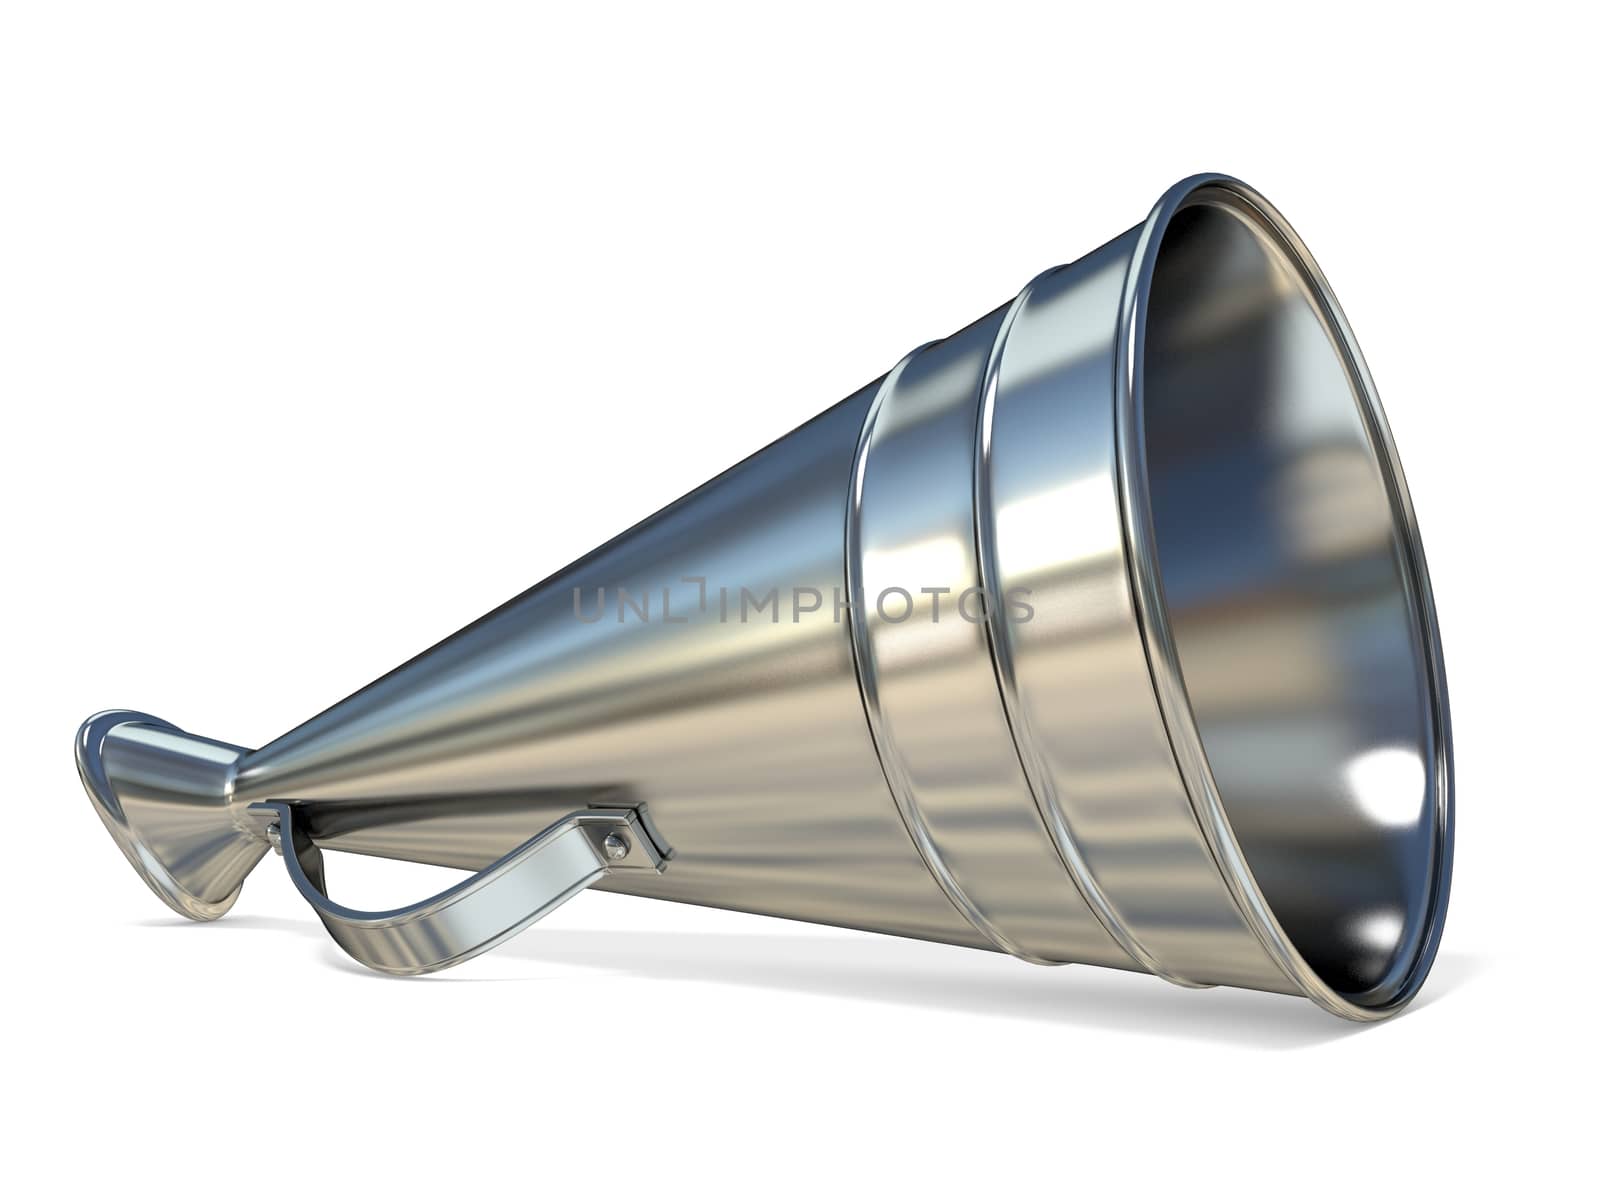 Retro old style megaphone 3D by djmilic